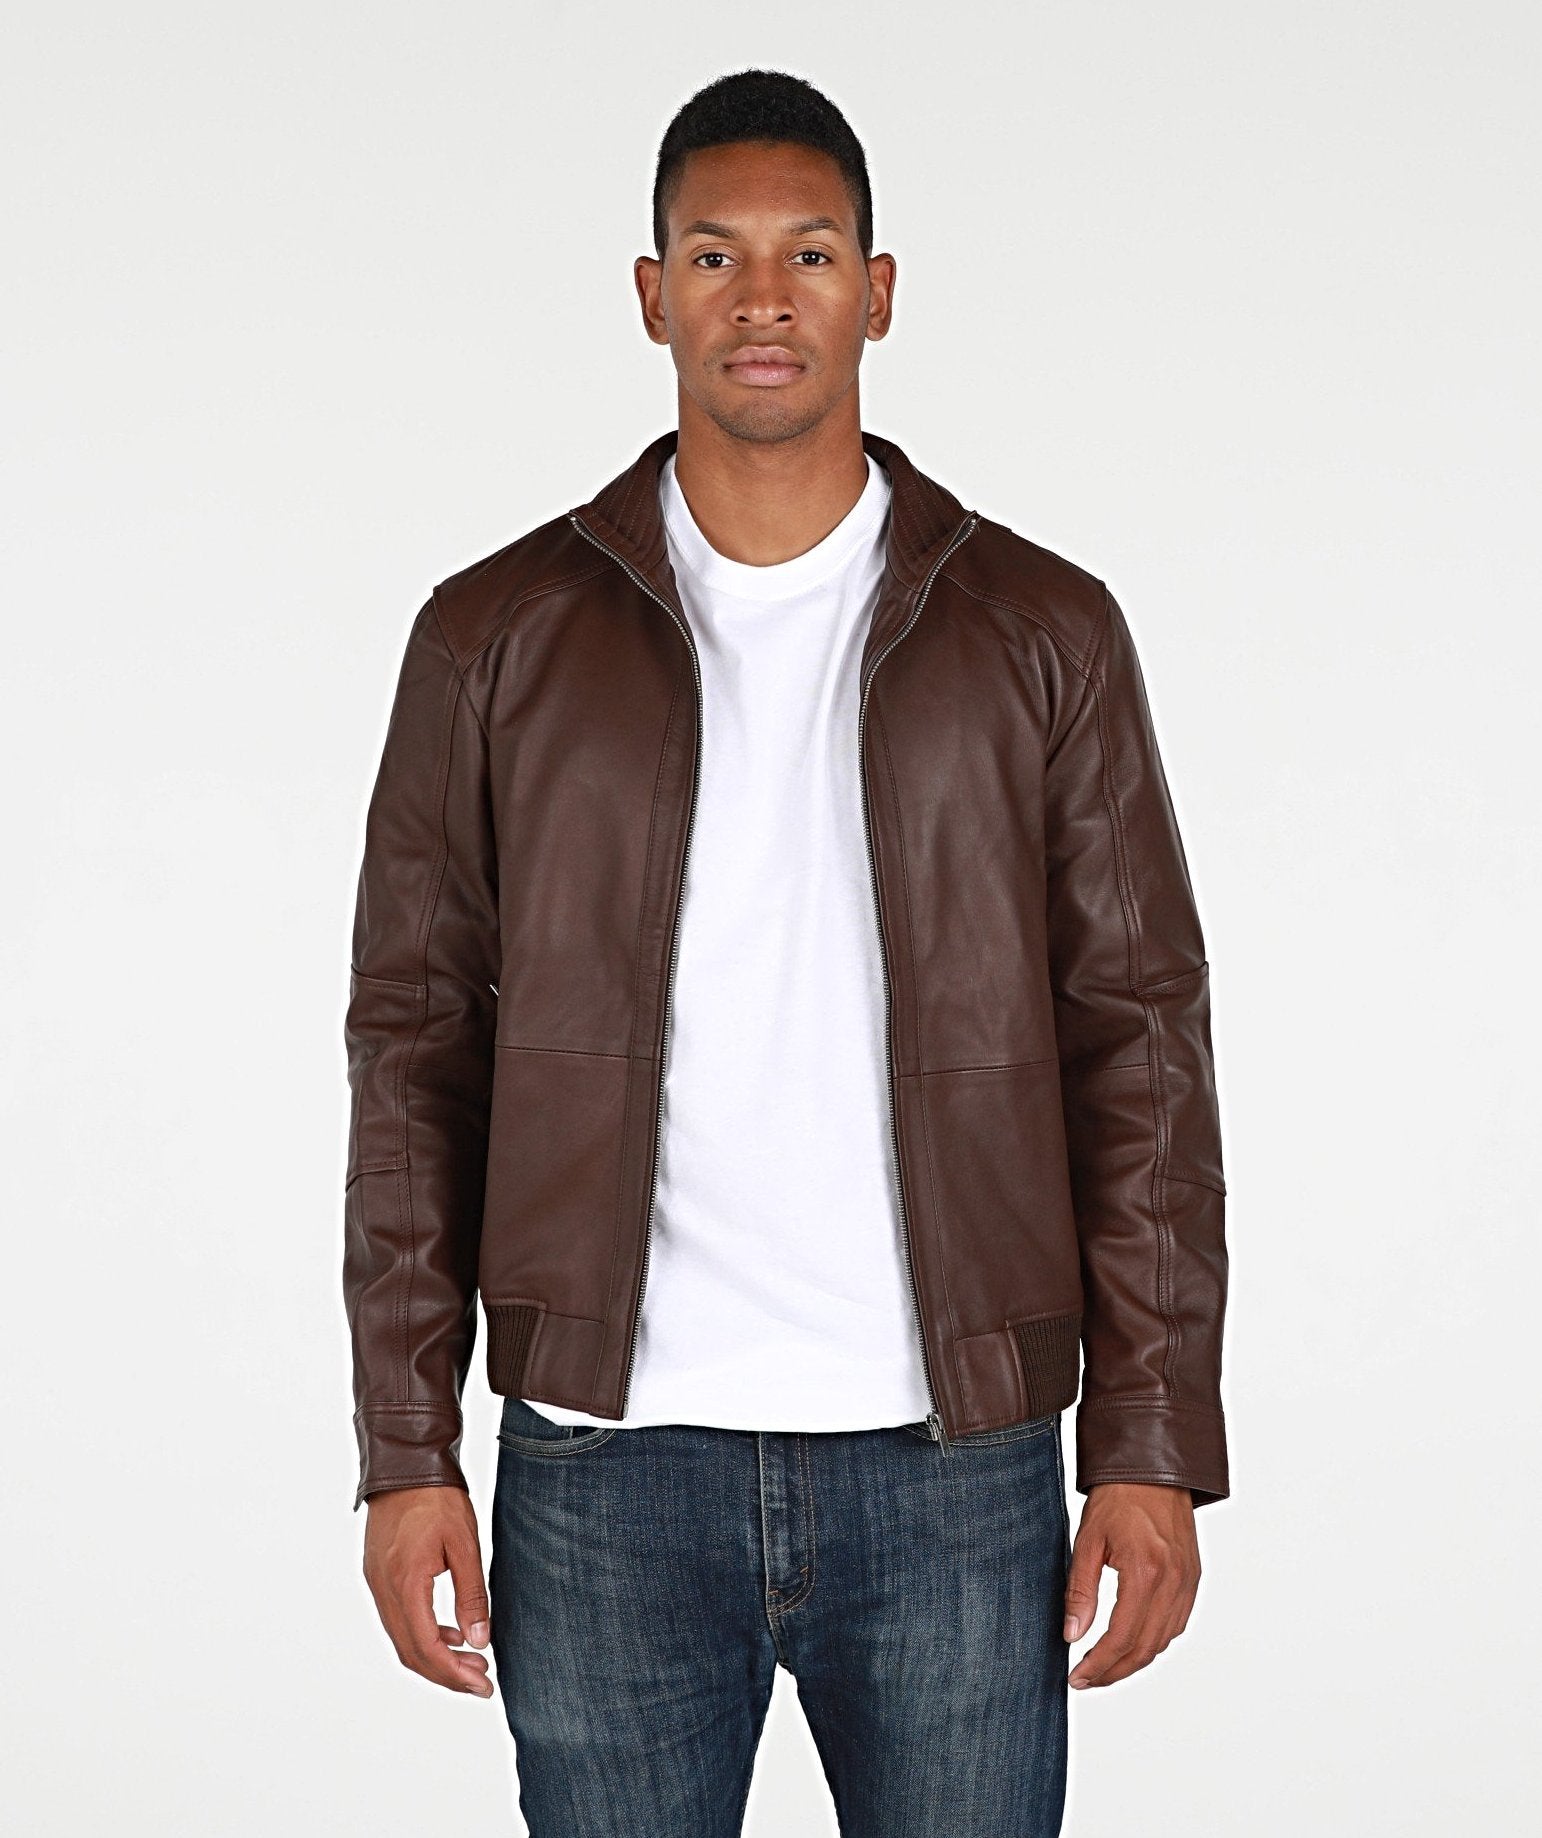 VANCE LEATHERS USA Men's Cafe Racer Waxed Lambskin Austin Brown Motorcycle Leather  Jacket, Size: XL (VL550Br-XL) - Walmart.com